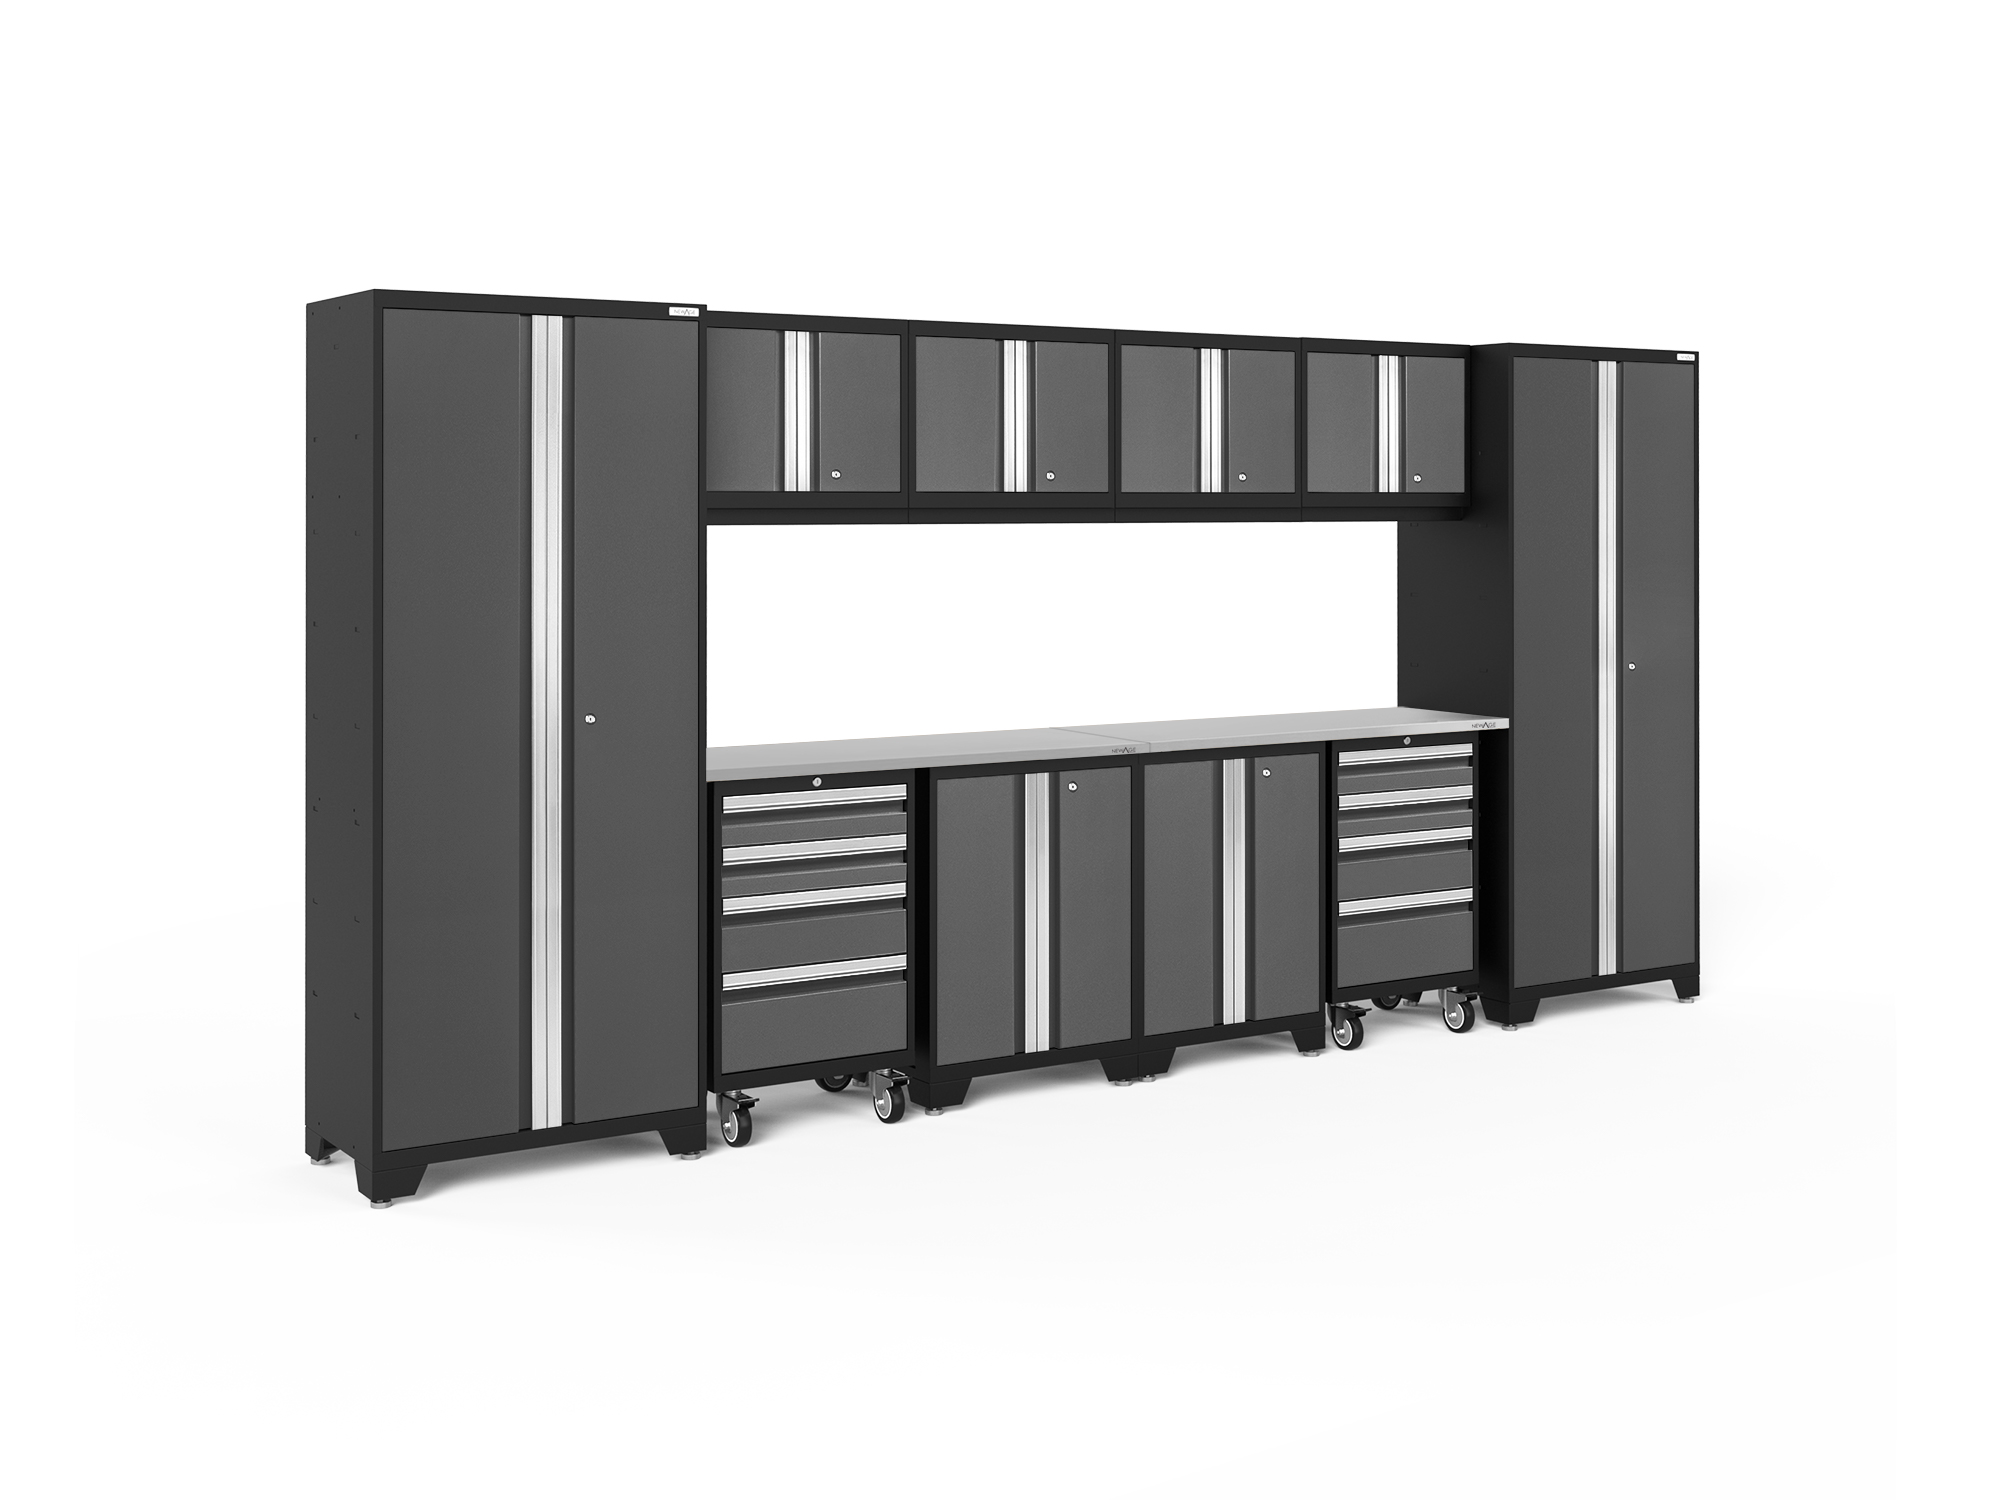 Bold 12 Pc Cabinet Set: Tool, Wall Cabinets, 30 in. Lockers